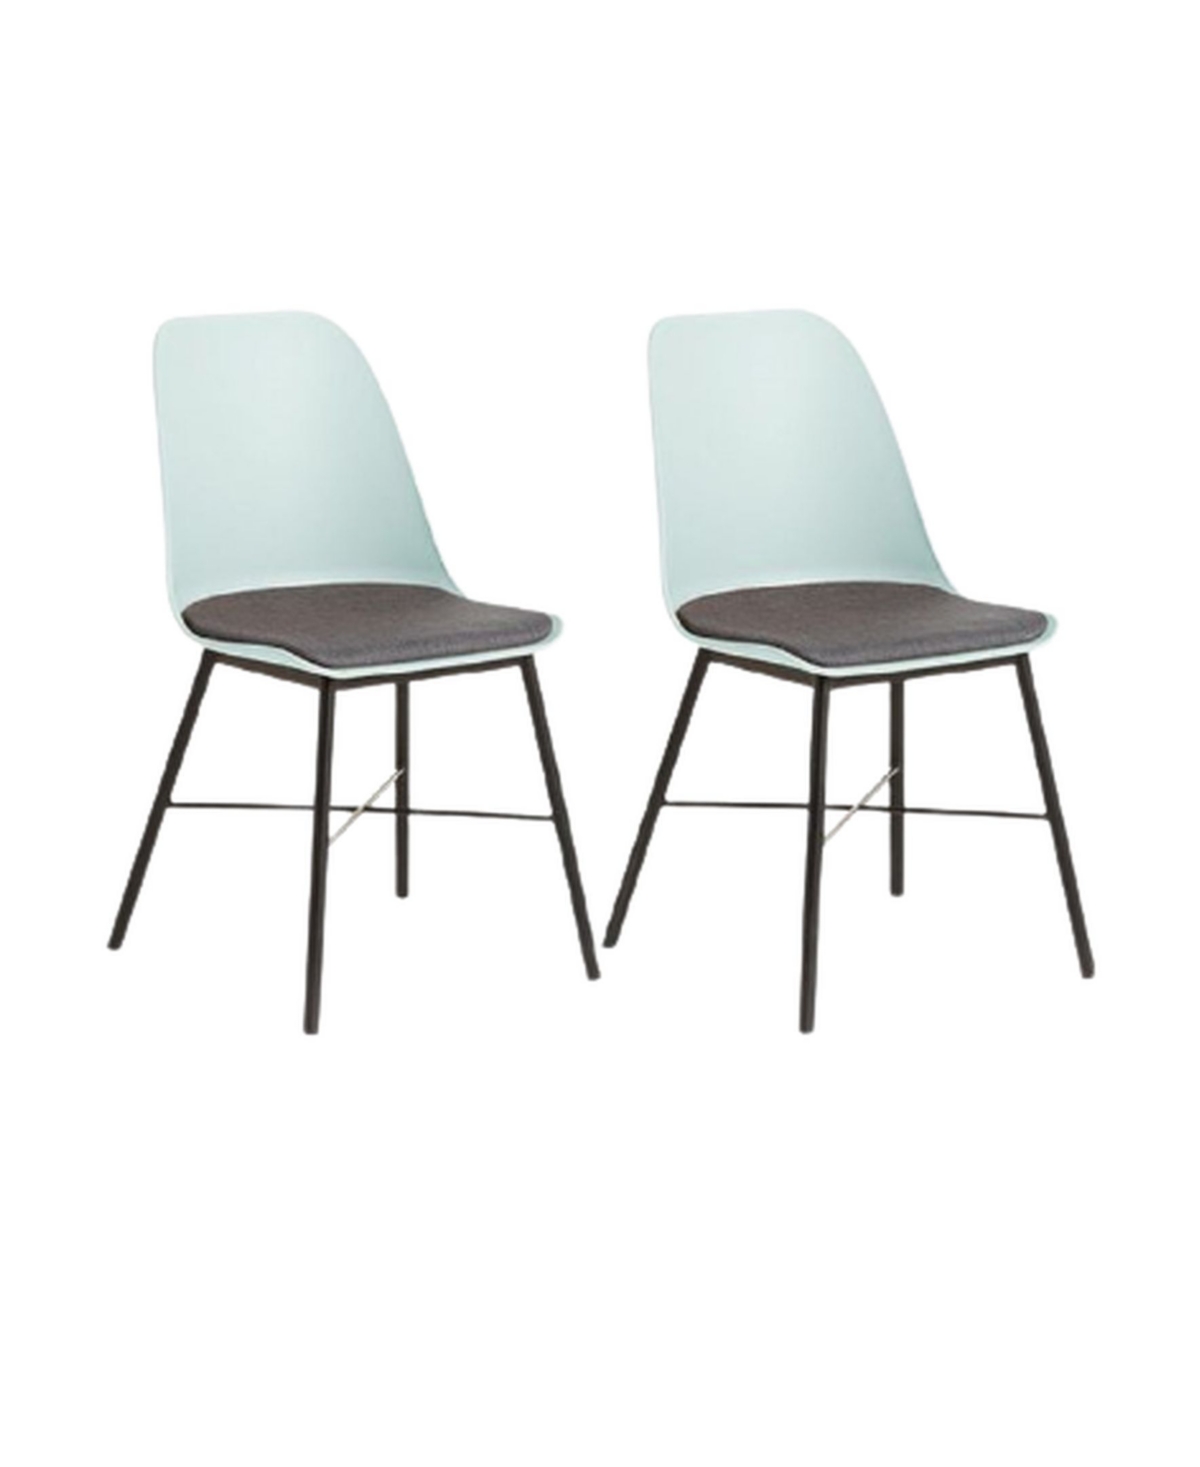 Alguire Side Chair, Set of 2